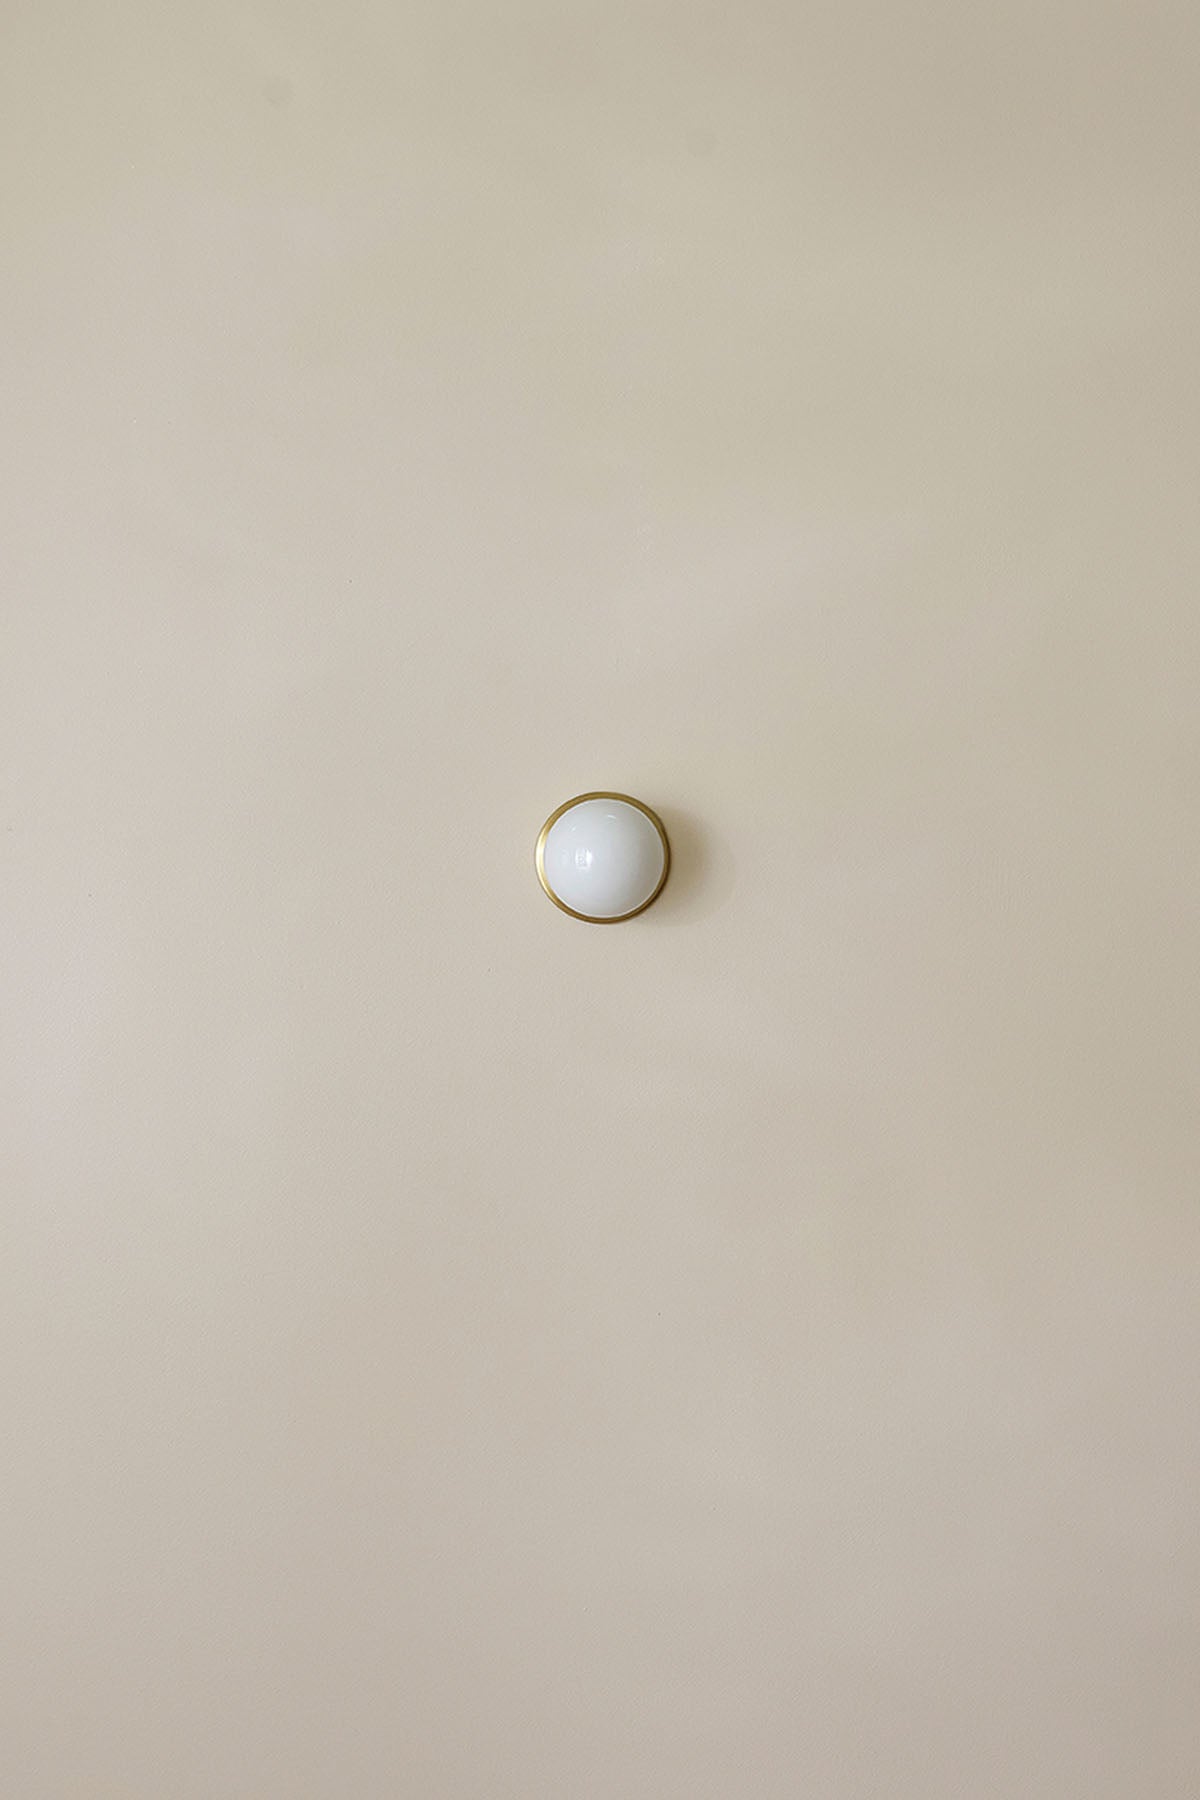 Orb Surface Sconce, Small in Brass and Opal. Image by Lawrence Furzey.